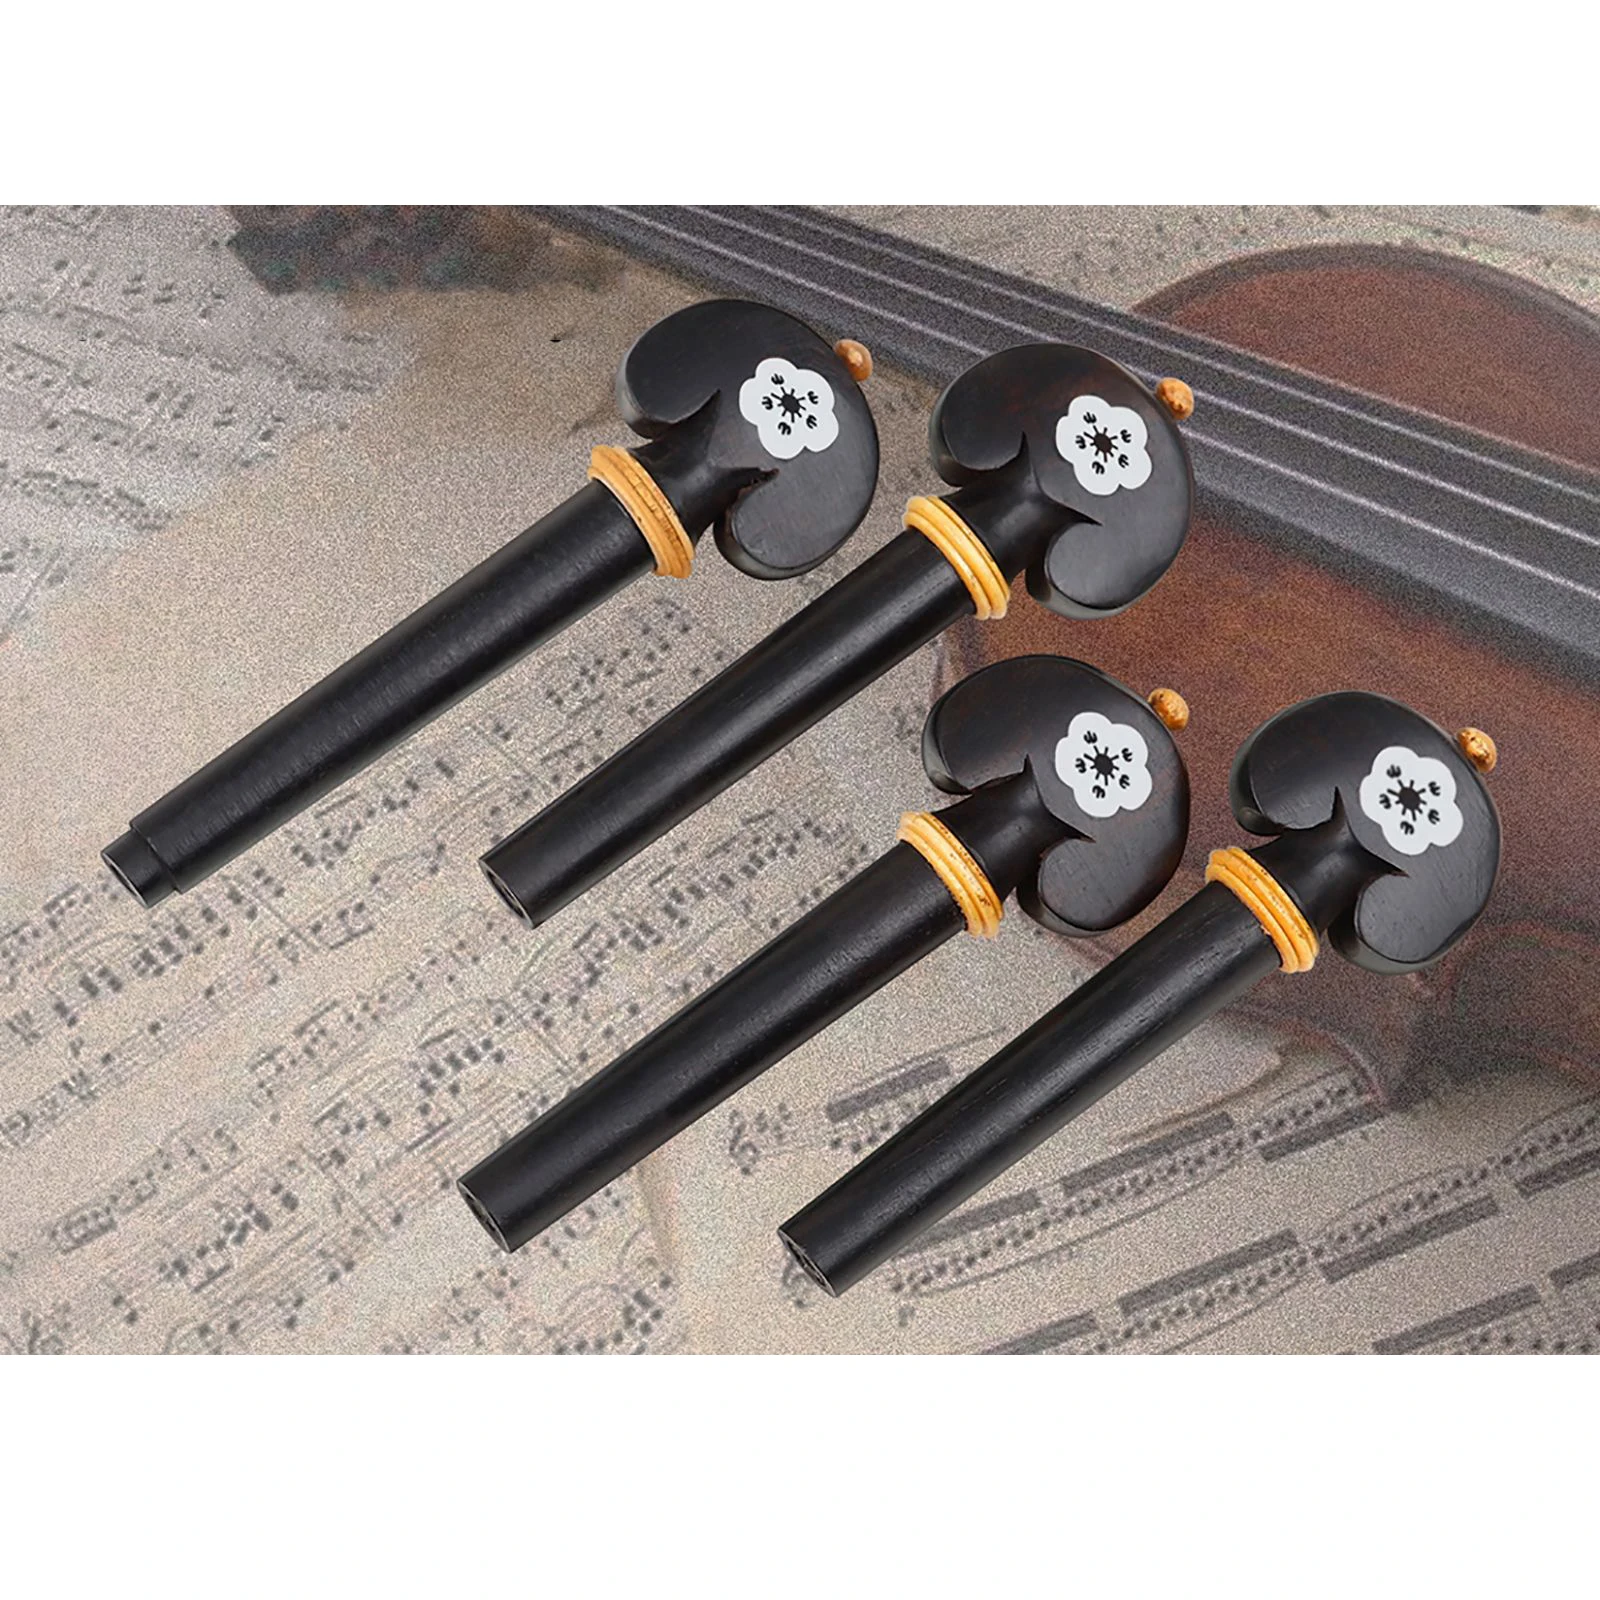 4x Natural Ebony 3/4 4/4 Violin Tuning Pegs Wooden Set Black Replacement String Instrument Accessories Hand Carved White Shell